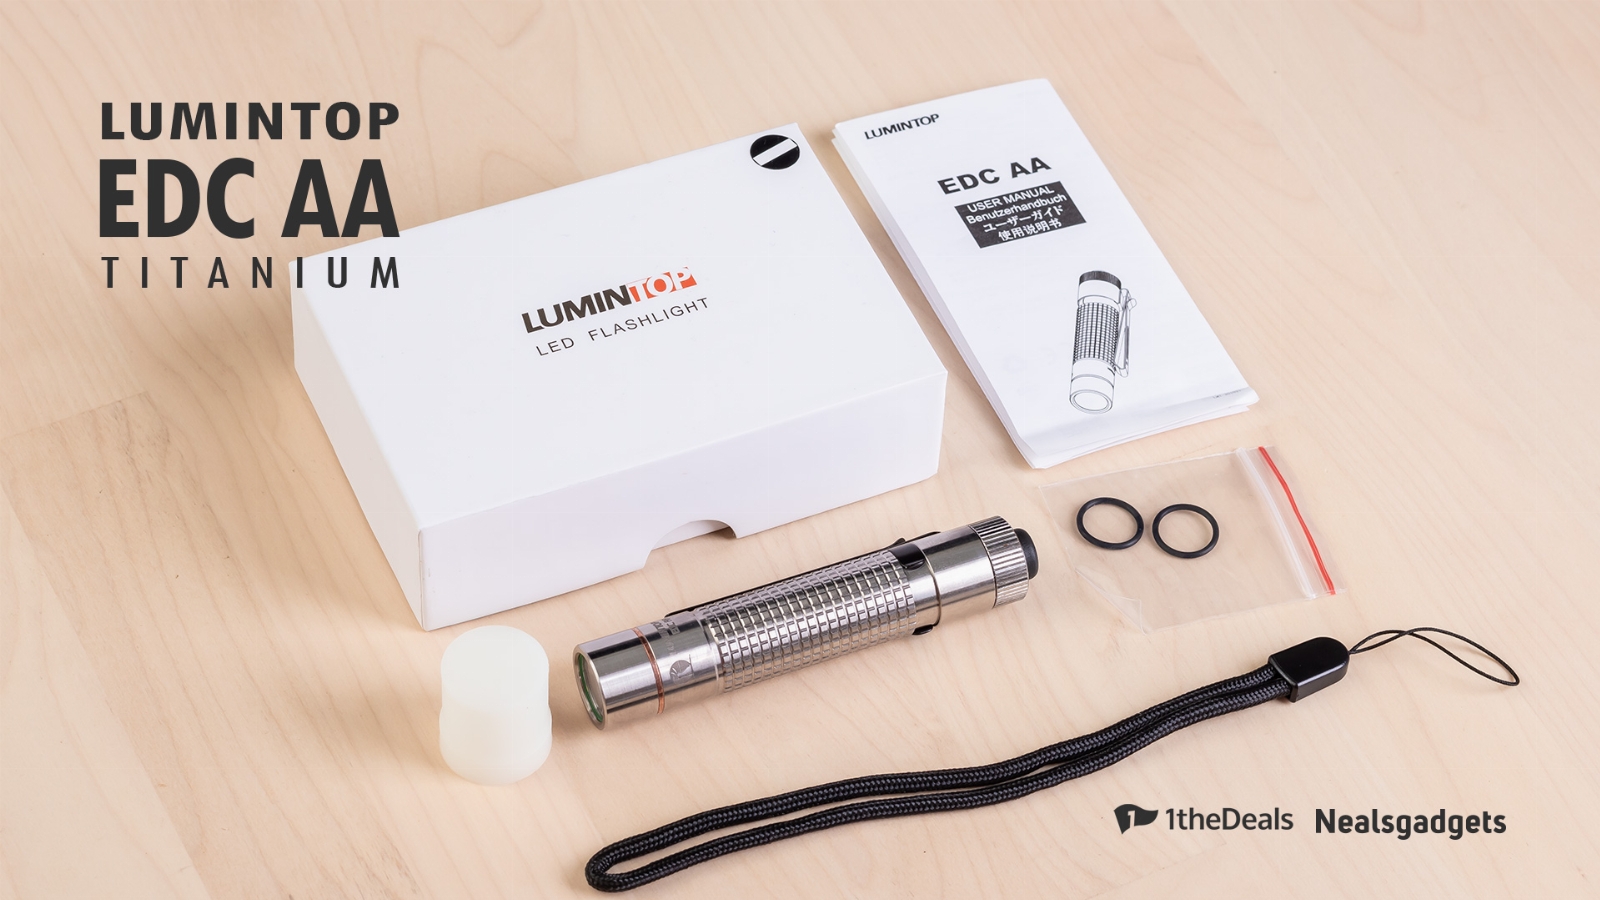 1thedeals-1600p-featured-07-lumintop-edc_AA_Ti-01.jpg